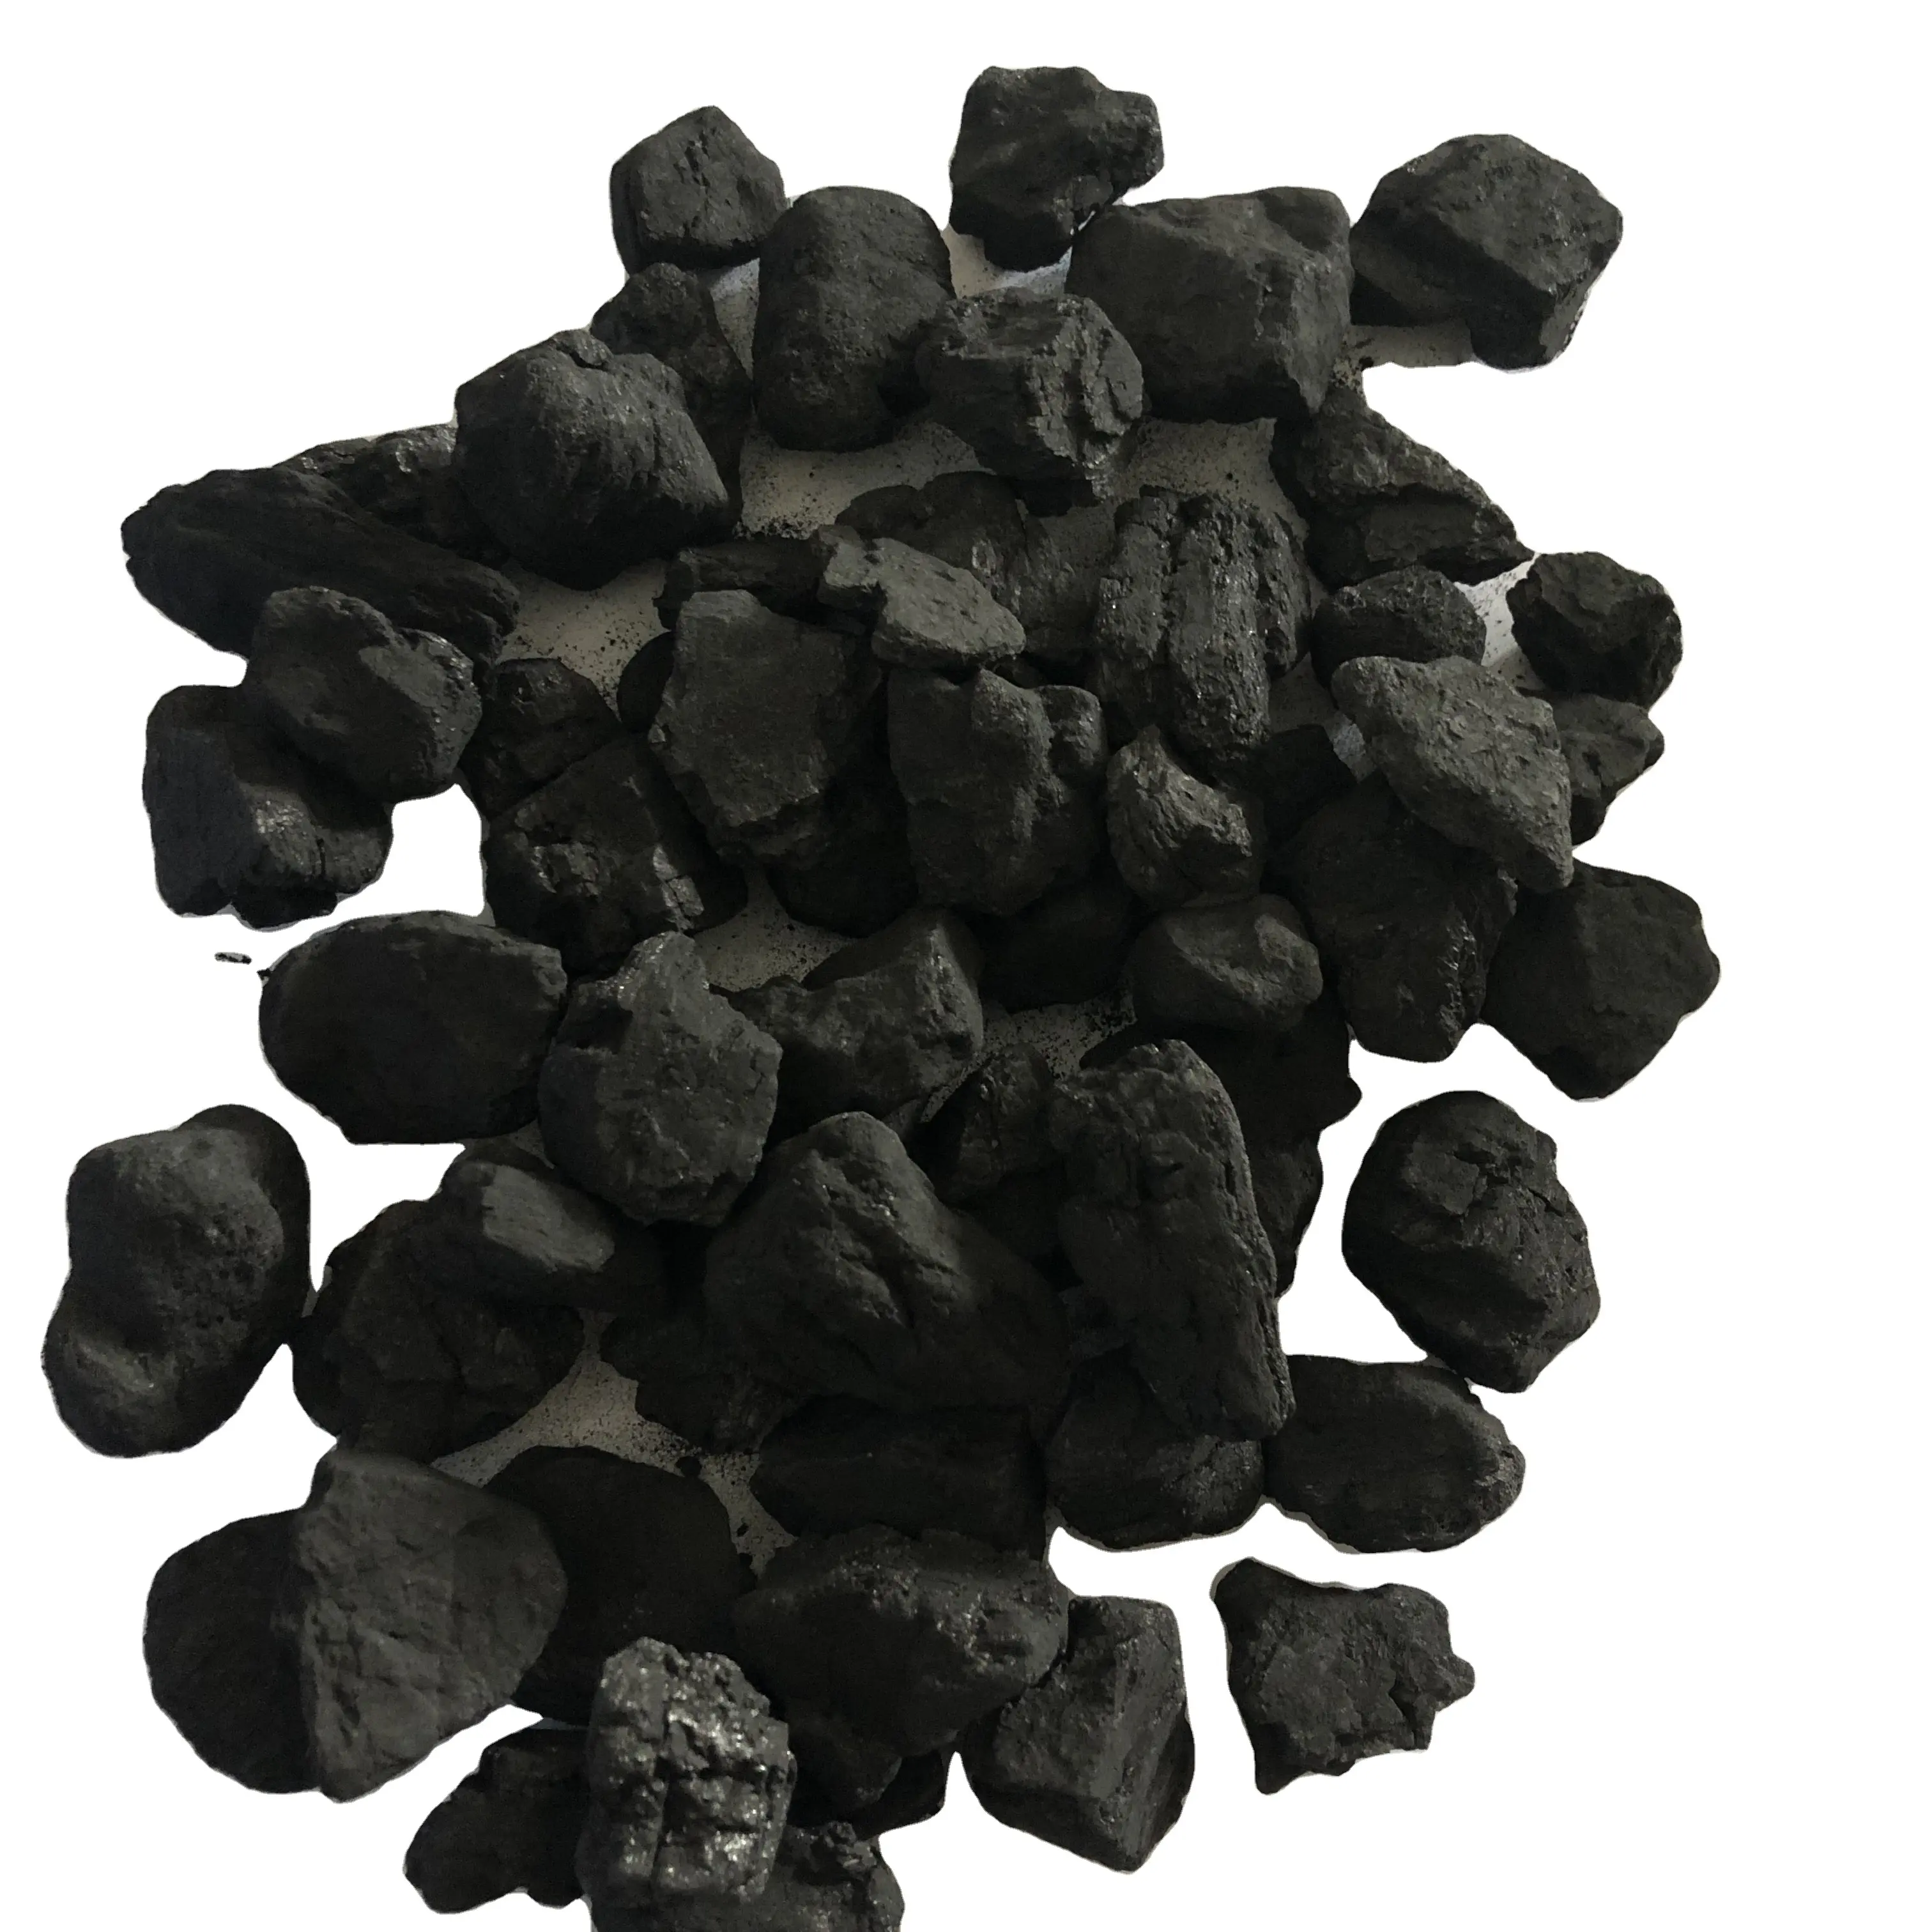 direct factory price industrial mettalurgical coke coal thermal conduction graphite met coke gas exporter from india